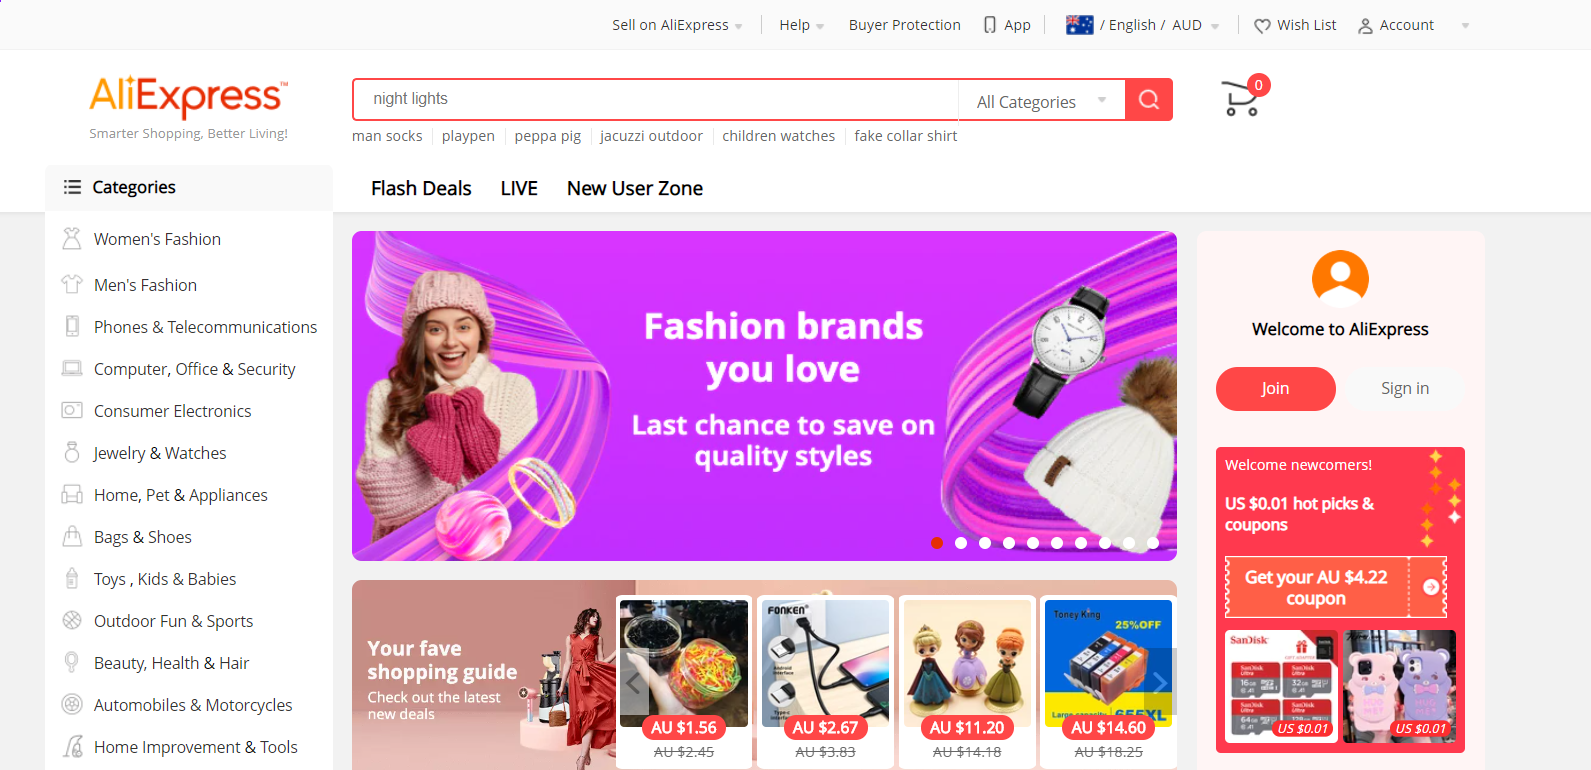 AliExpress is home to thousands of sellers